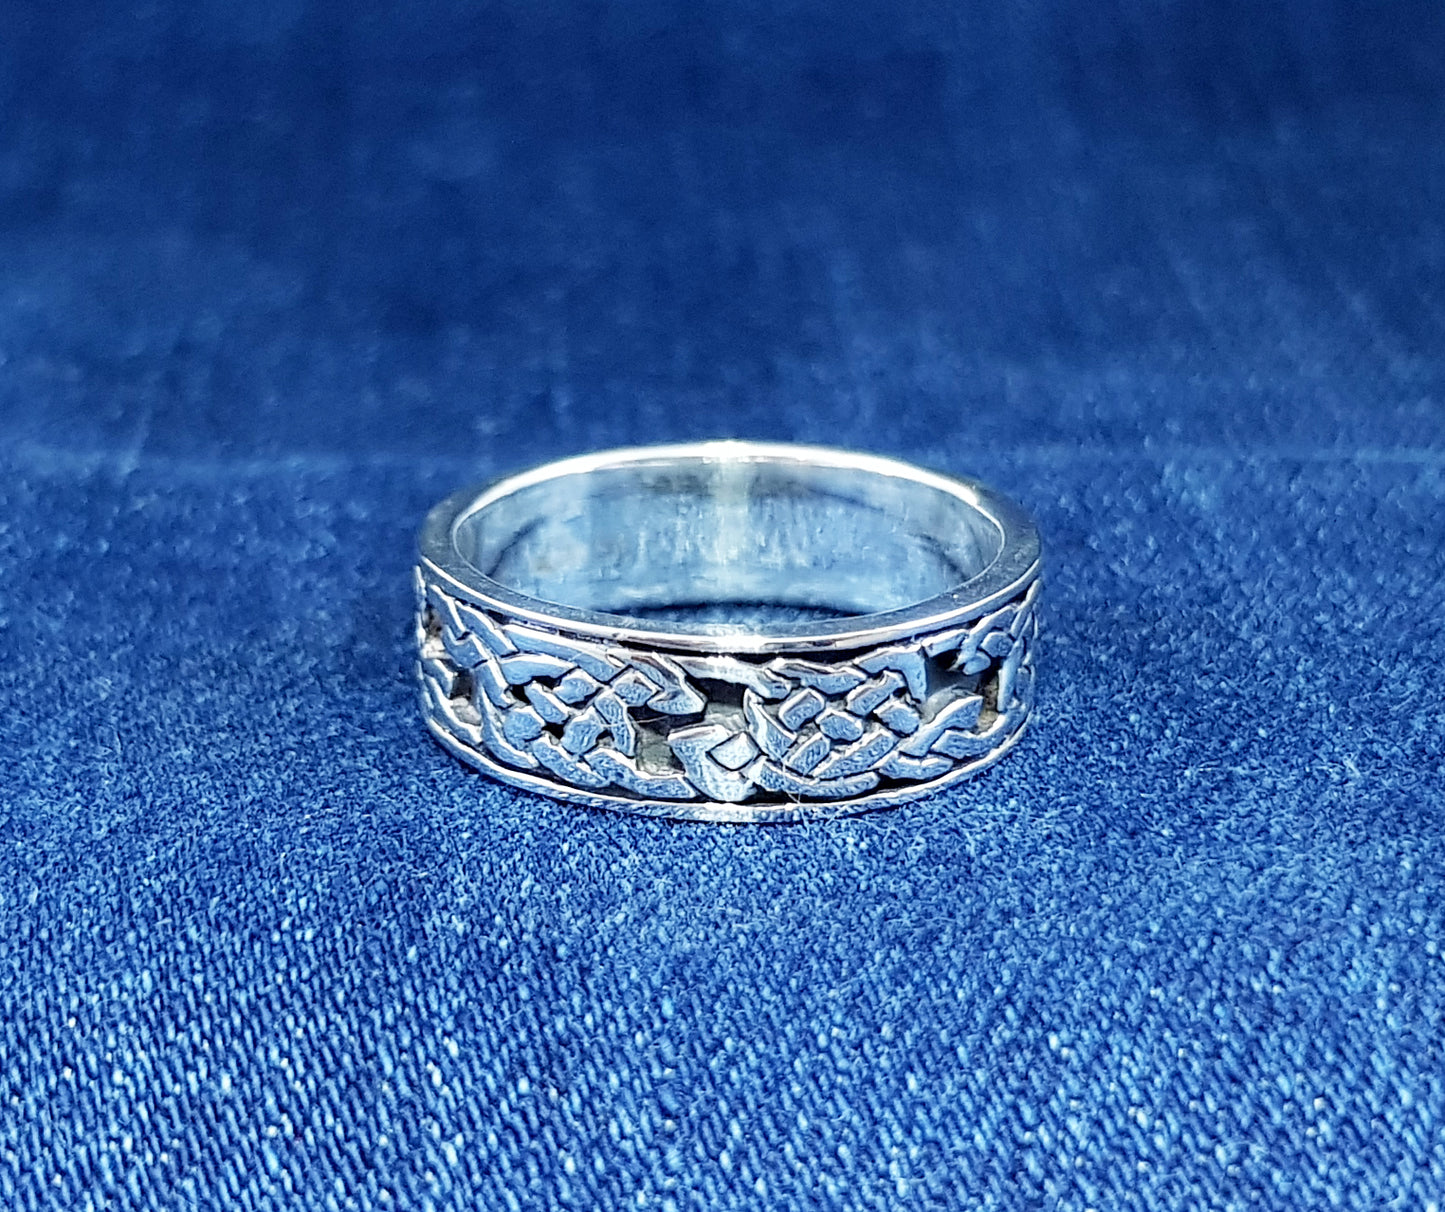 Sterling Silver ring with an Intricate Celtic Pattern